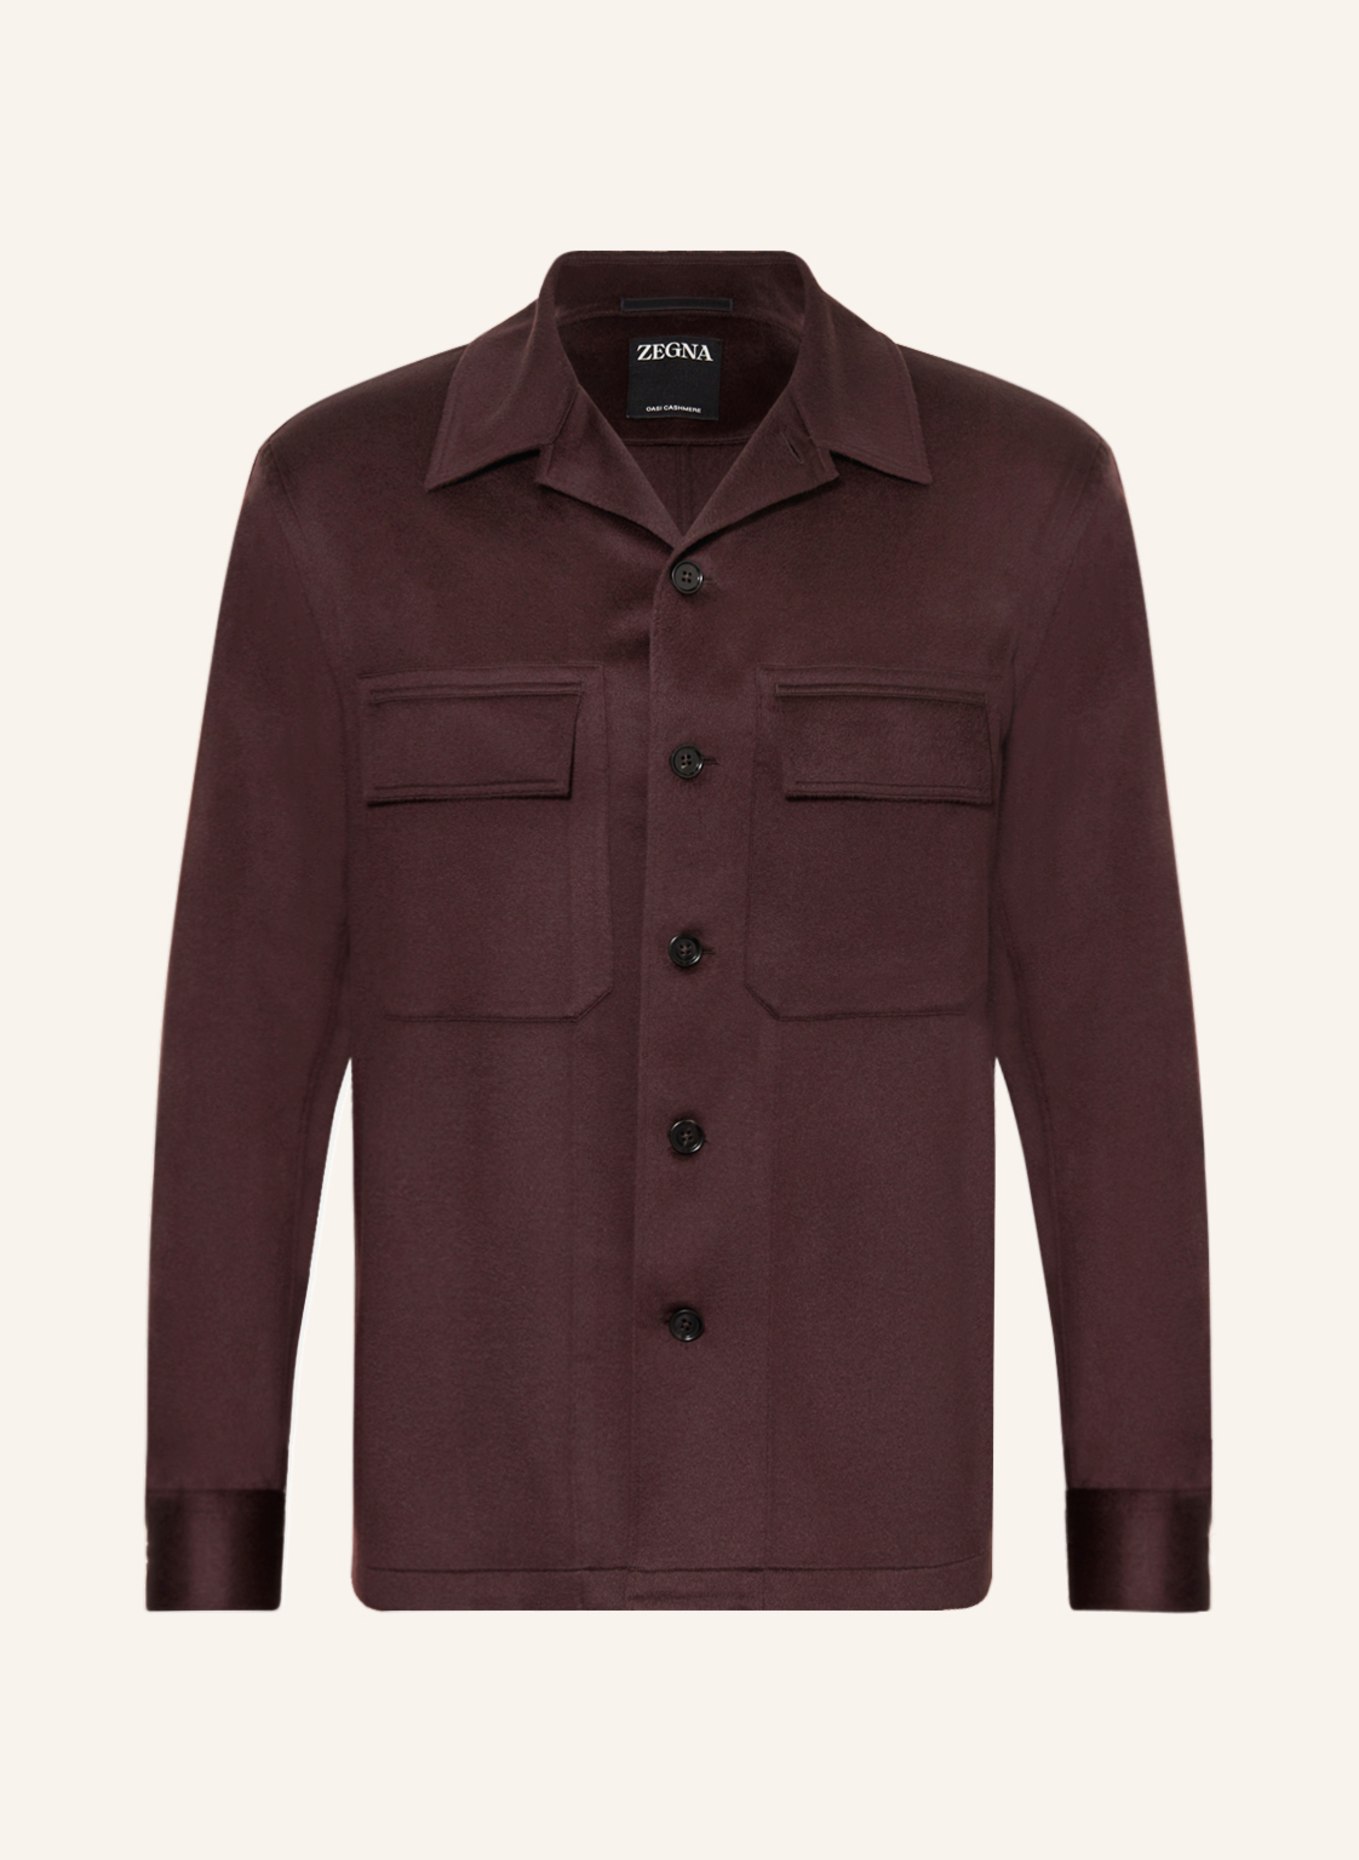 ZEGNA Cashmere overshirt, Color: DARK RED(Image null)